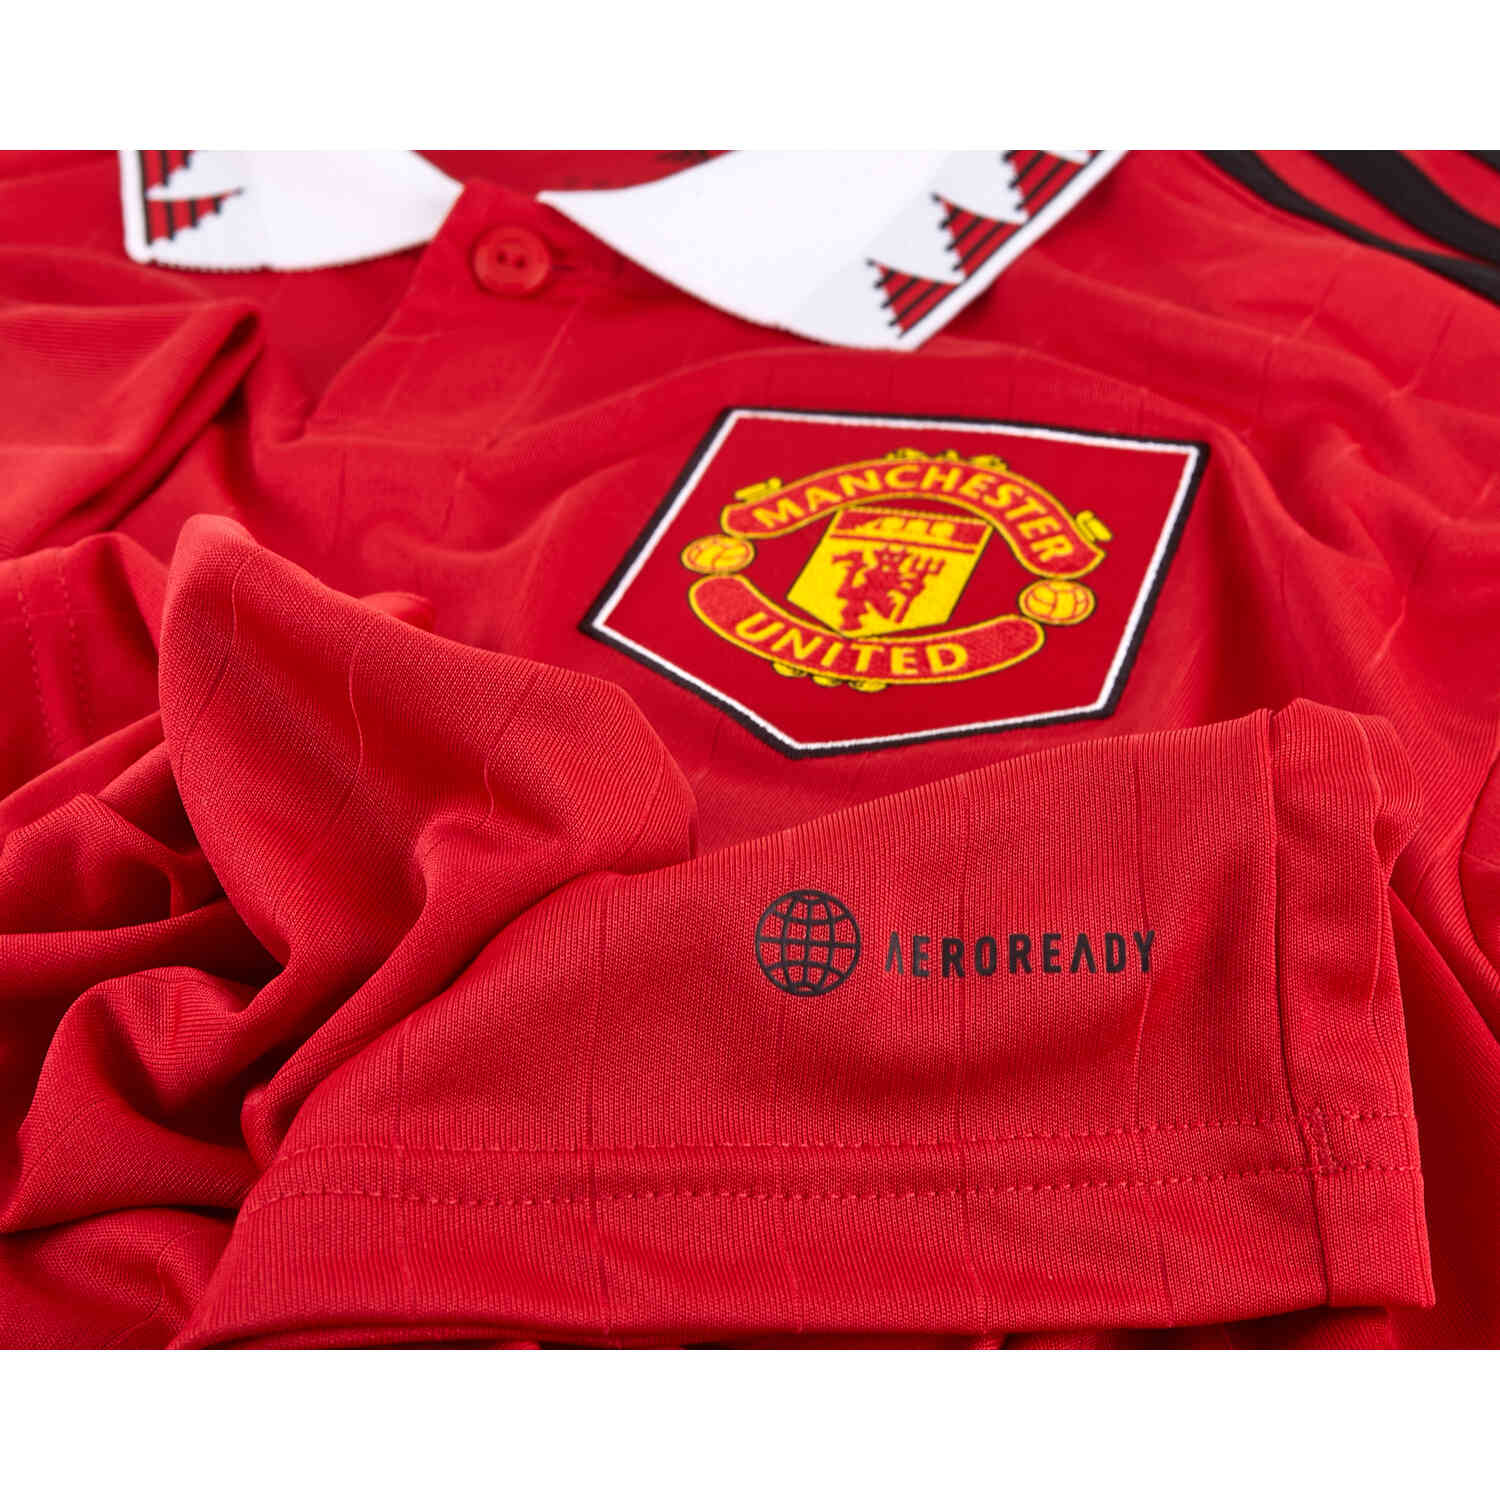 2022/23 adidas Manchester United Home Jersey - Soccer Master